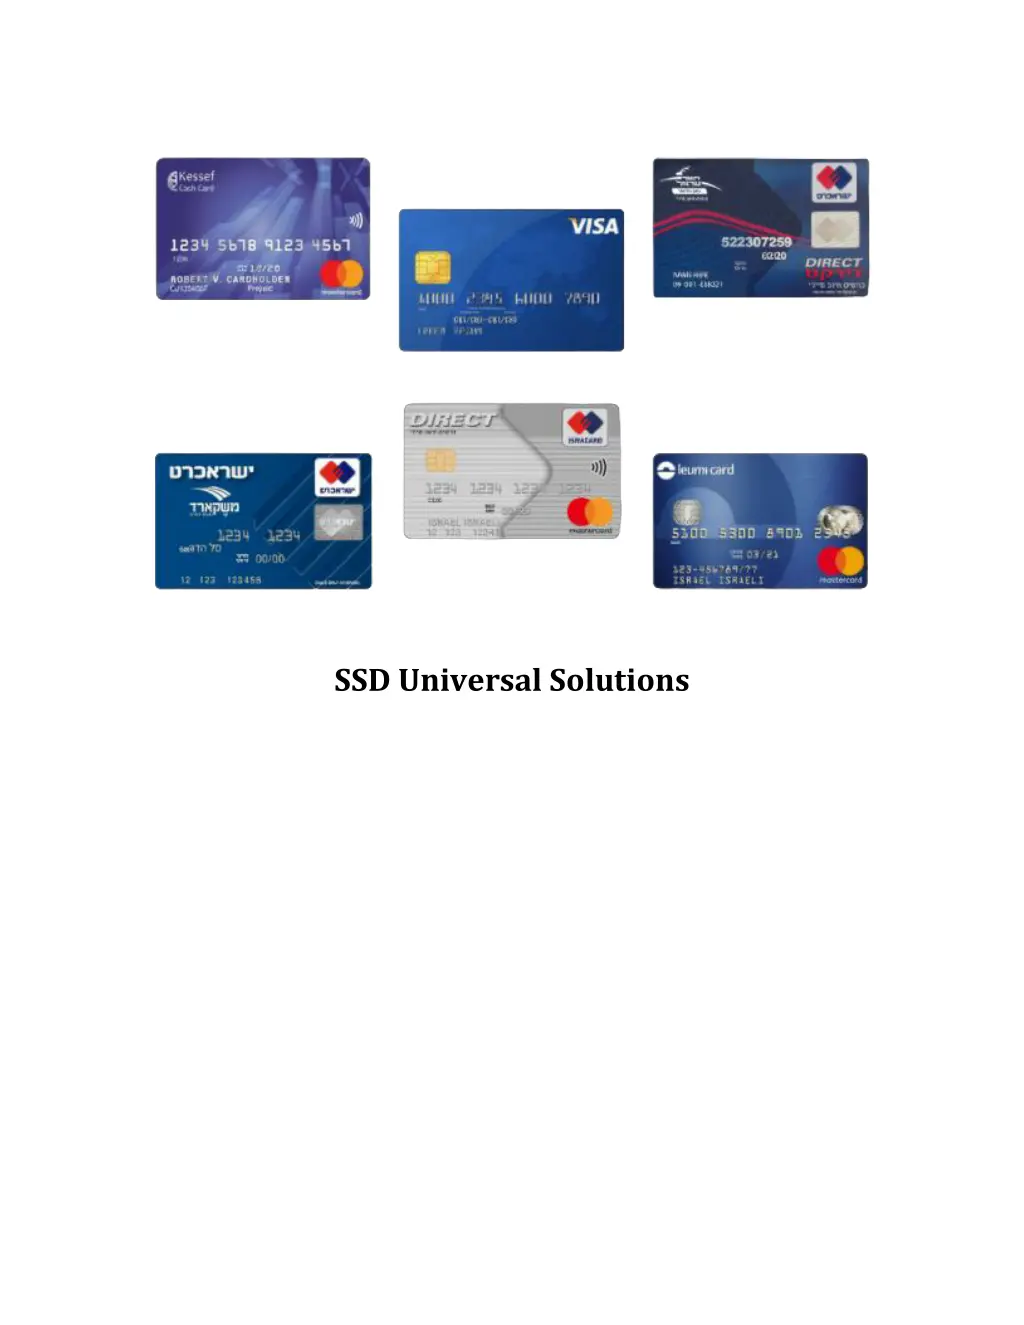 ssd universal solutions